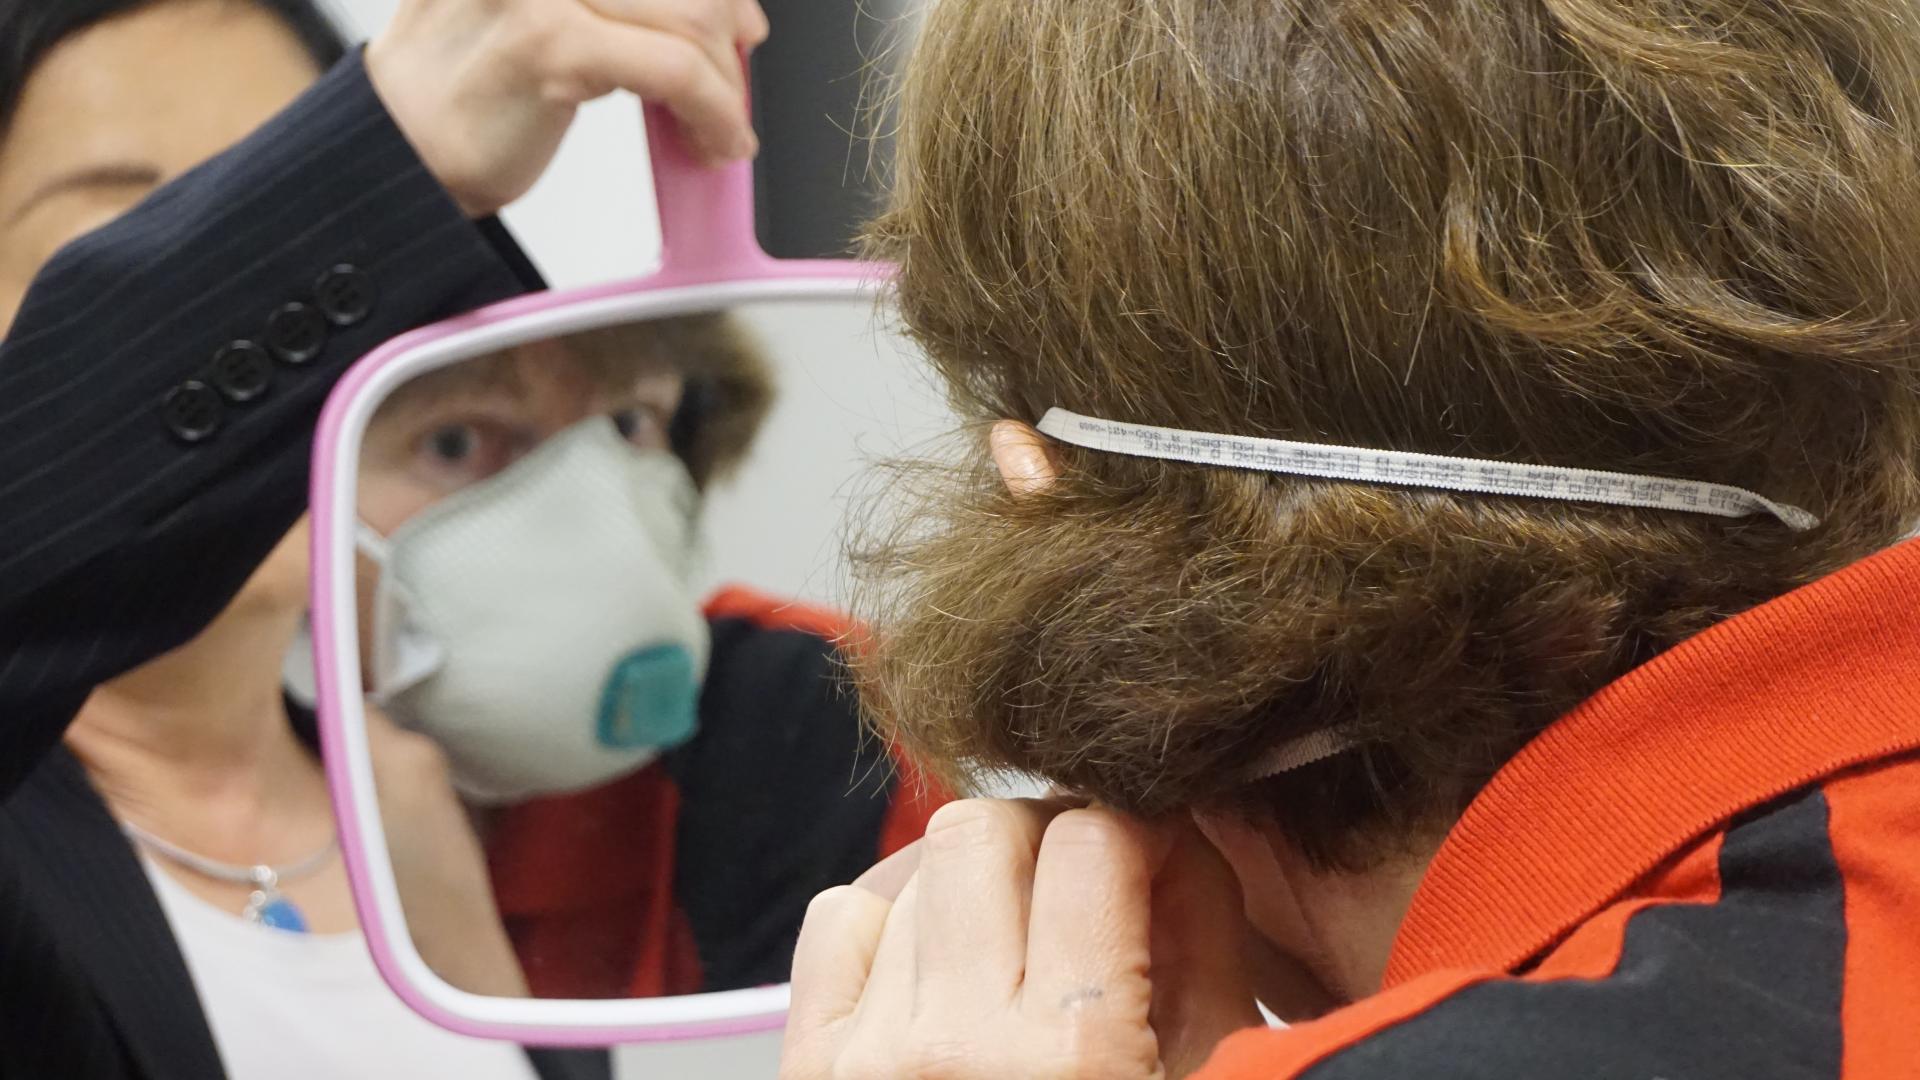 Applicator looks at how a respirator fits in the mirror